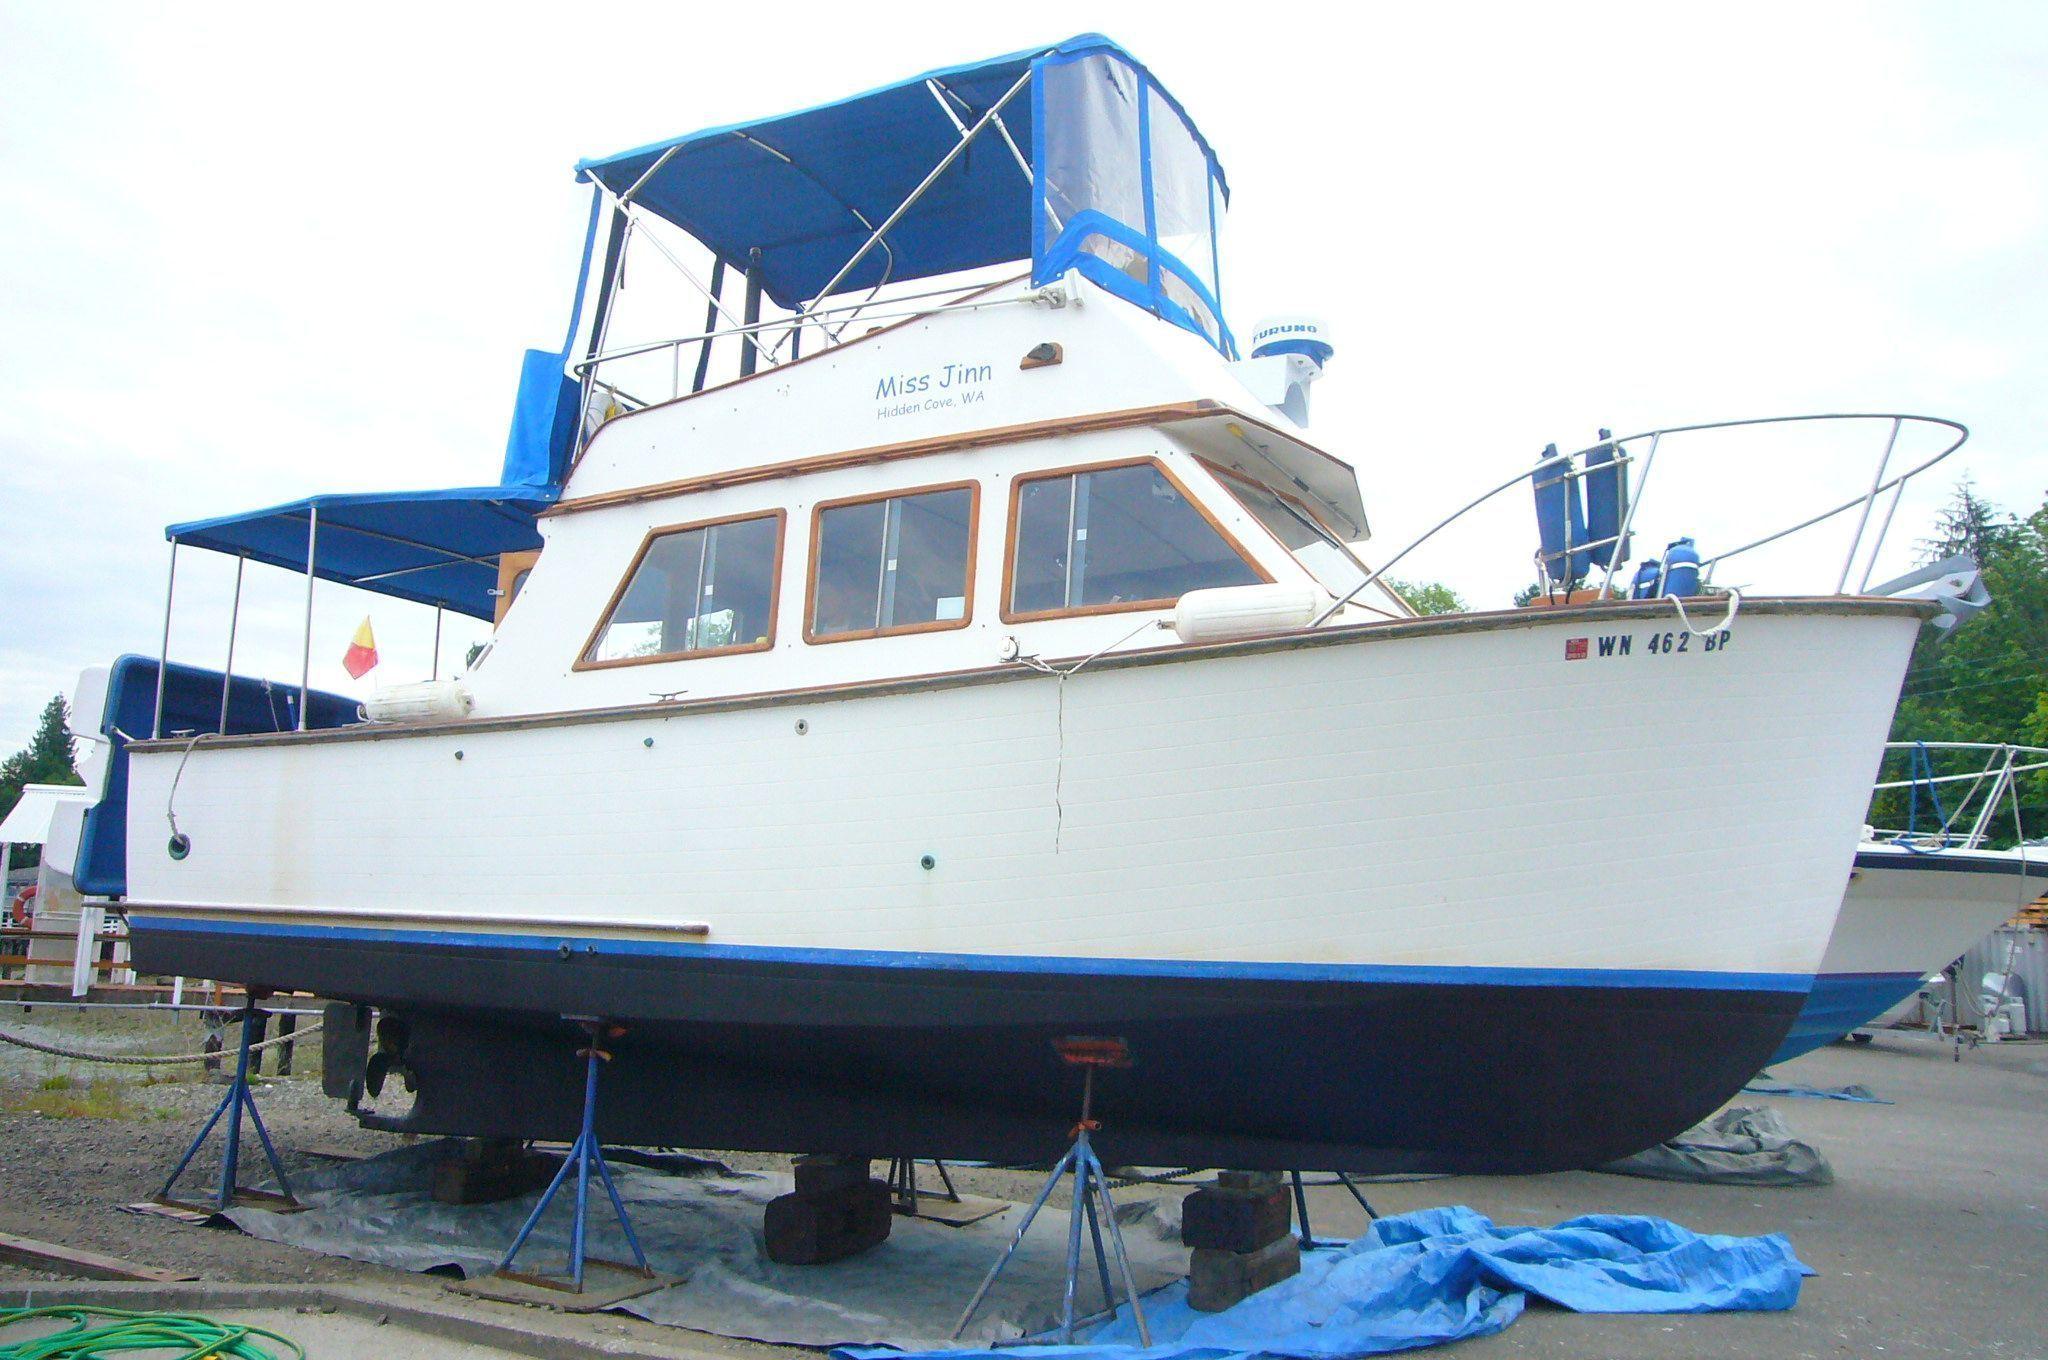 Lien Hwa Flybridge Trawler [With stern thruster], Port Orchard at our docks